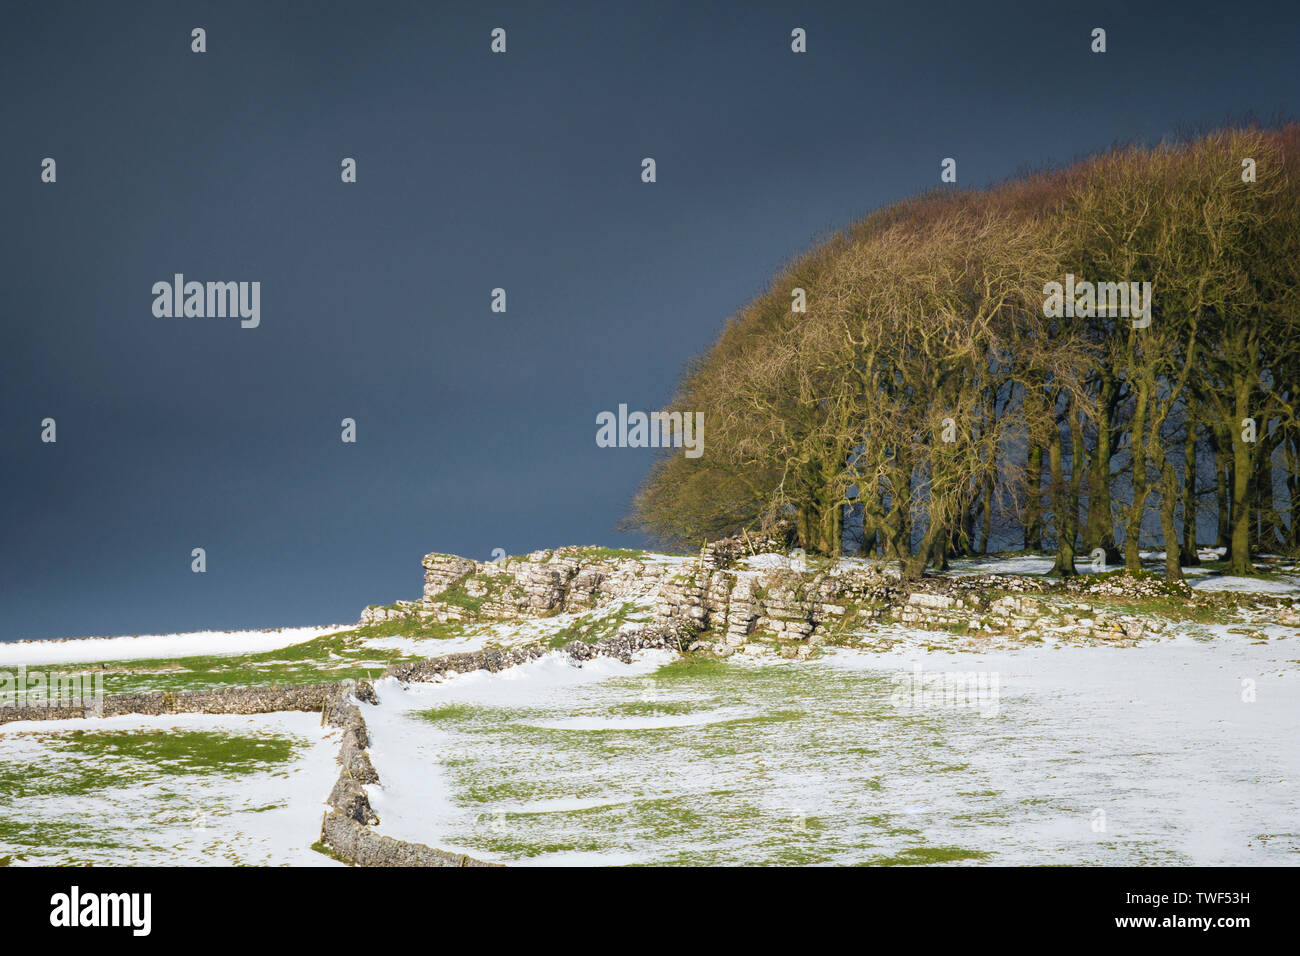 A small copse of trees in Derbyshire as a snow storm approaches. Stock Photo